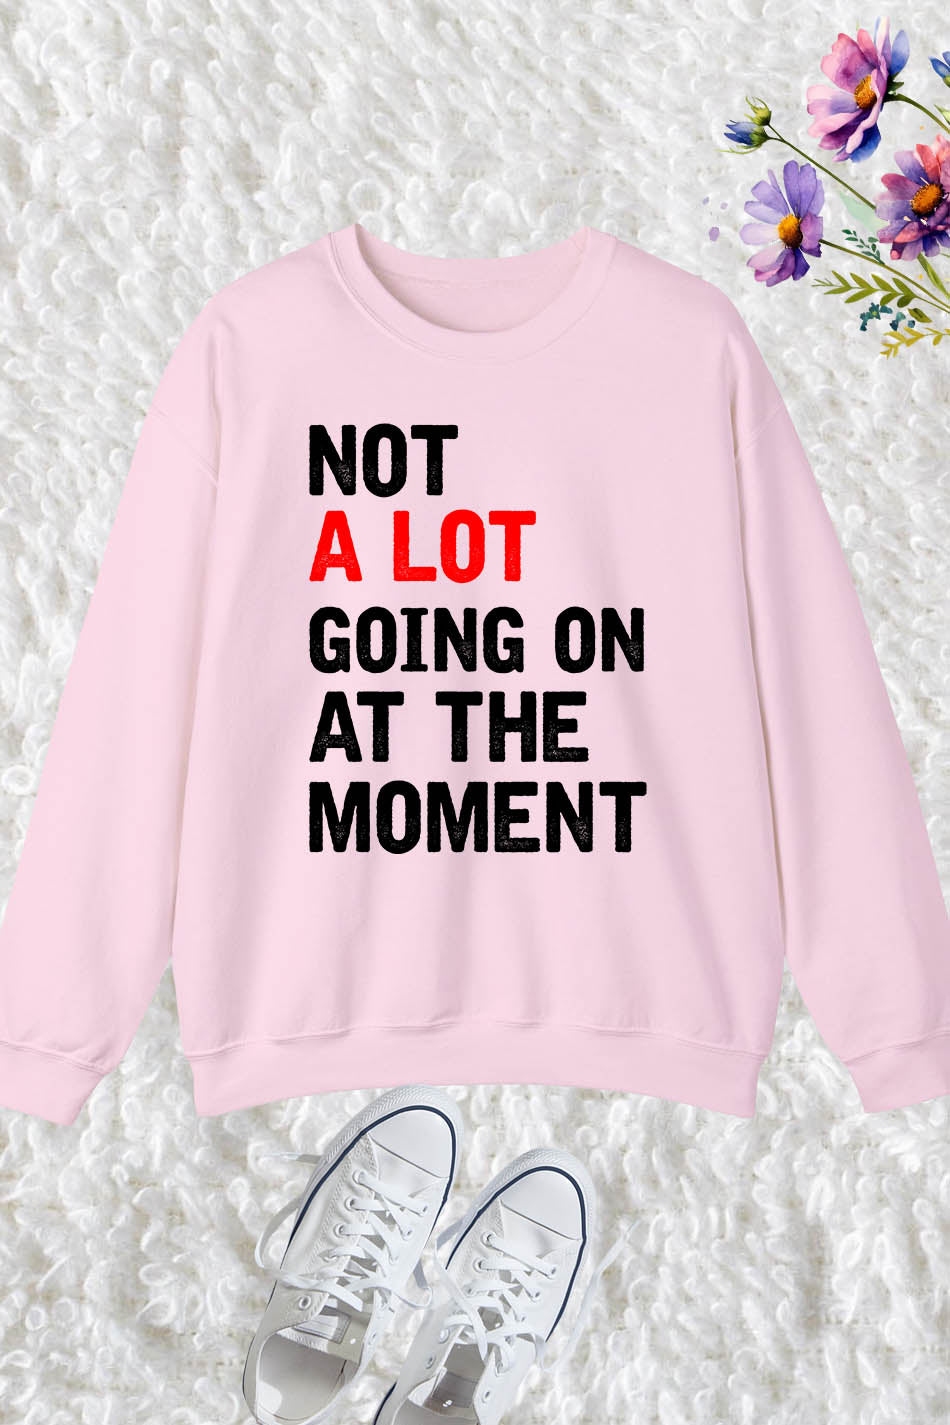 Not A Lot Going On at The Moment Trendy Sweatshirt